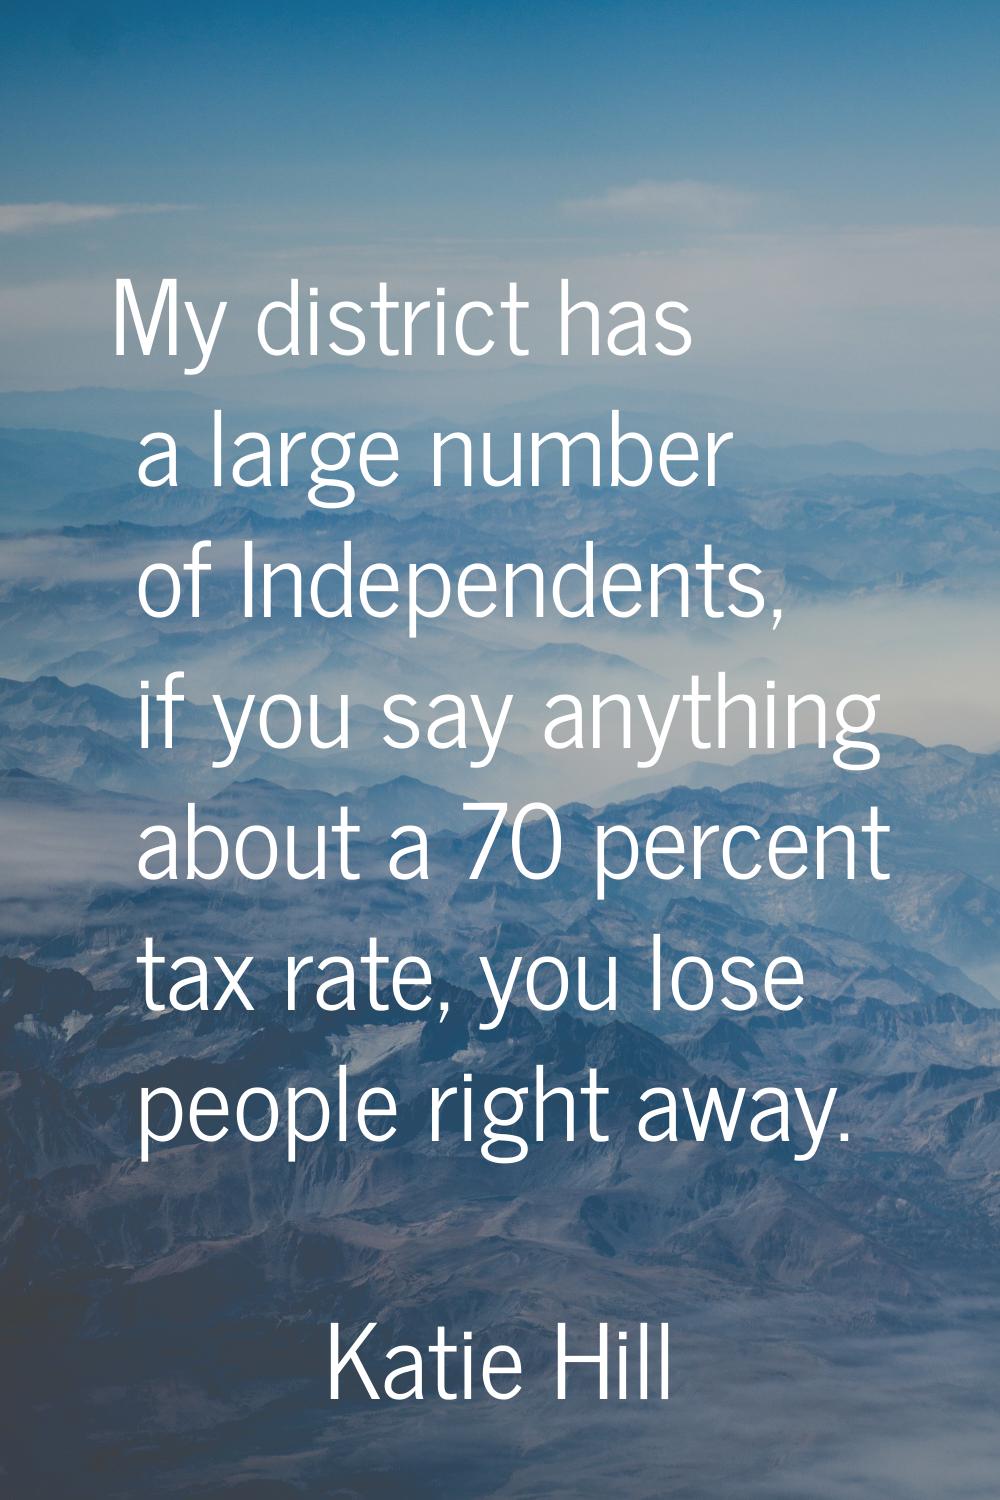 My district has a large number of Independents, if you say anything about a 70 percent tax rate, yo